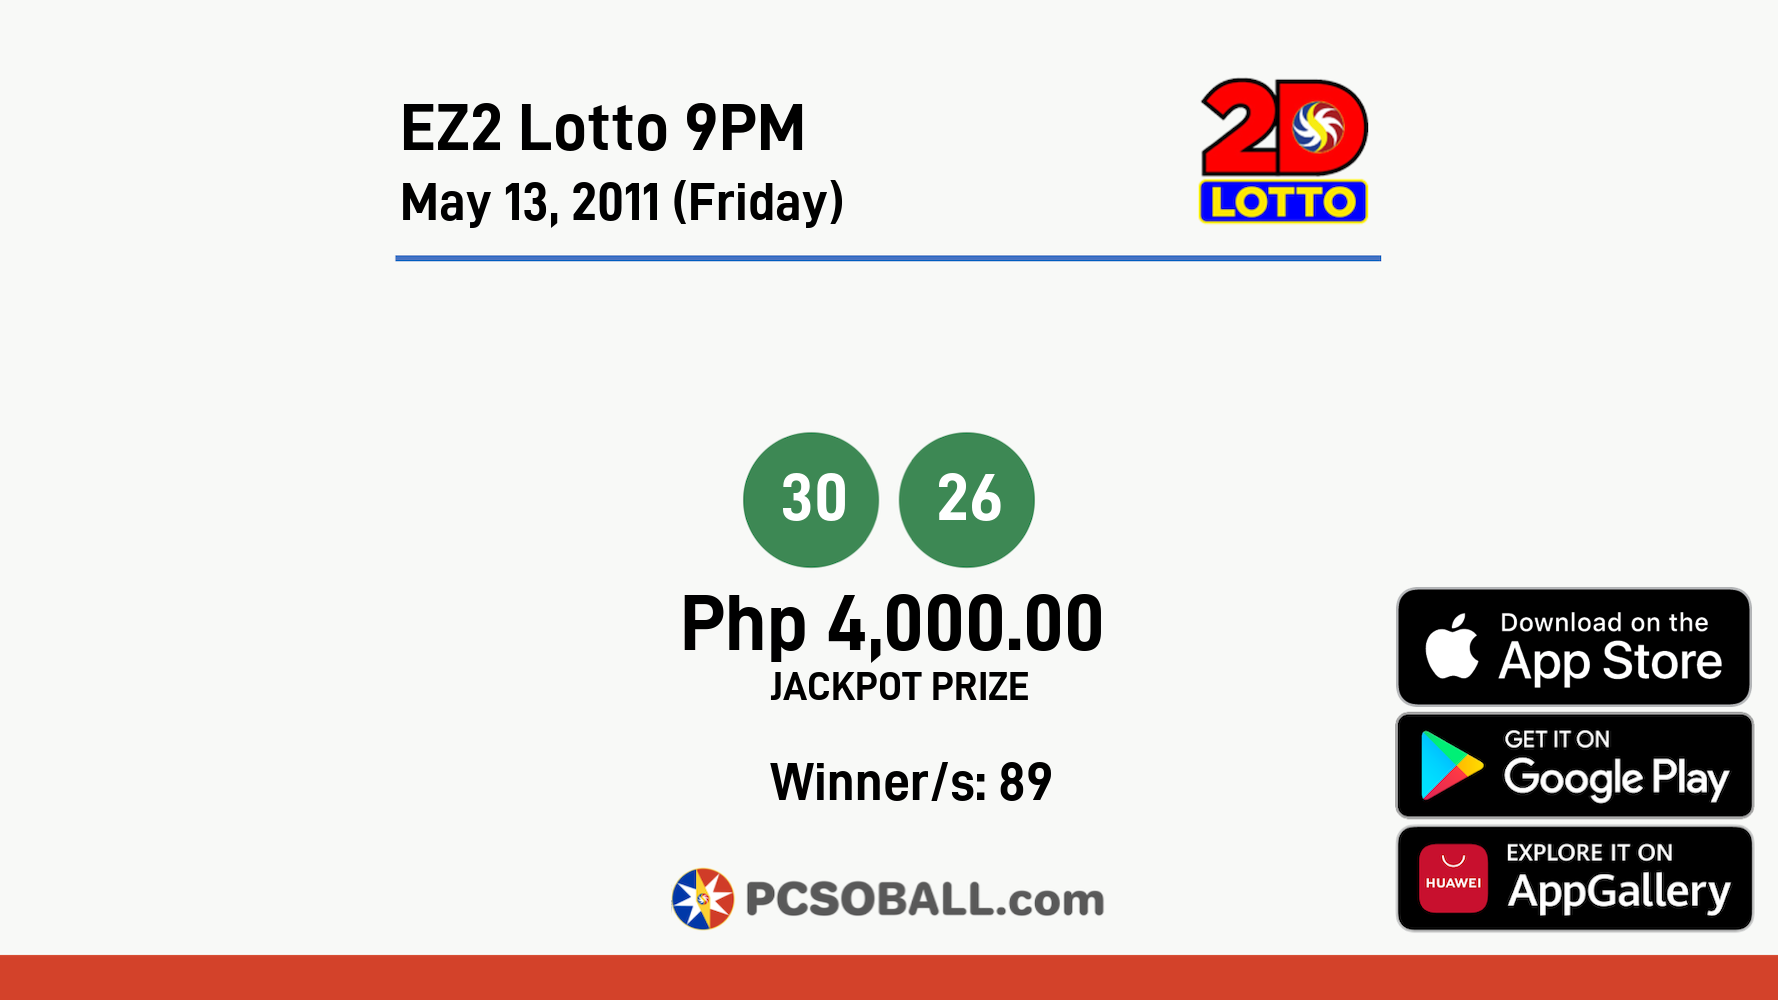 EZ2 Lotto 9PM May 13, 2011 (Friday) Result